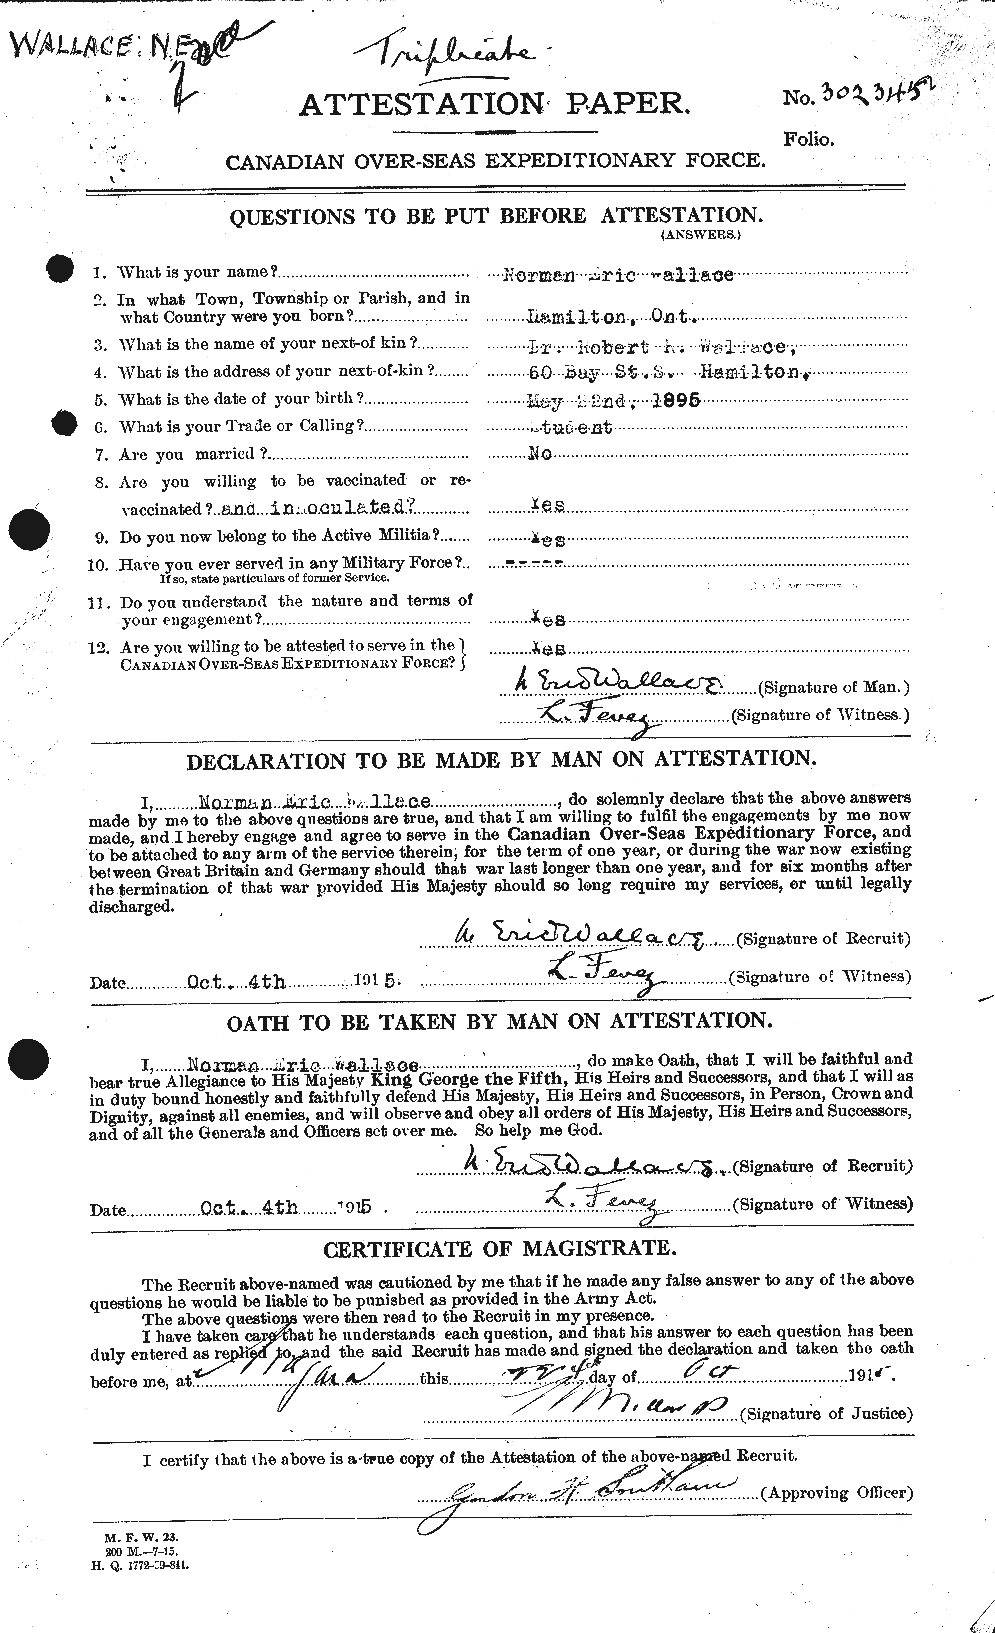 Personnel Records of the First World War - CEF 654686a